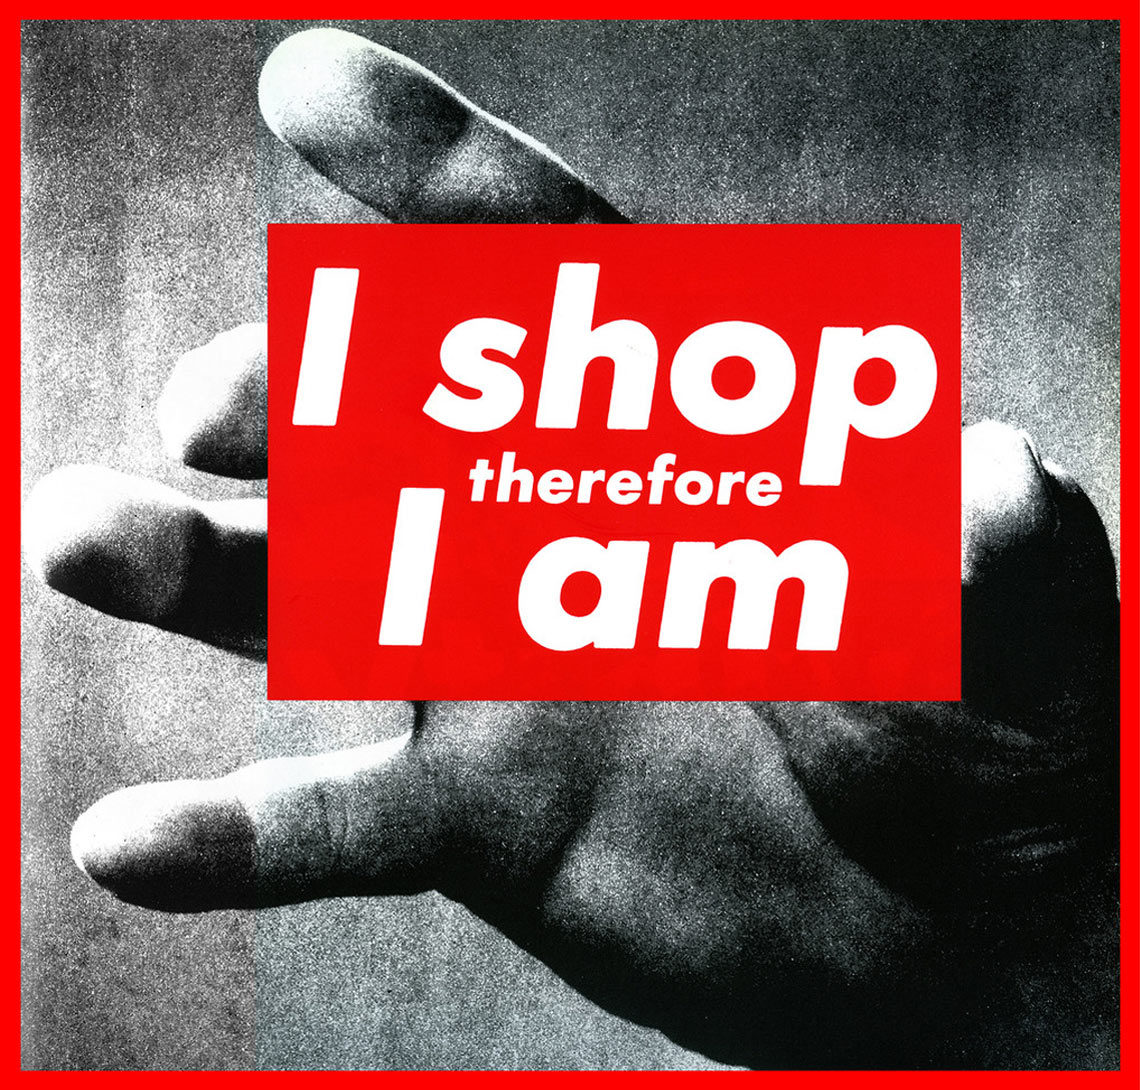 Untitled (I shop therefore I am), 1987 | via maryboonegallery.com